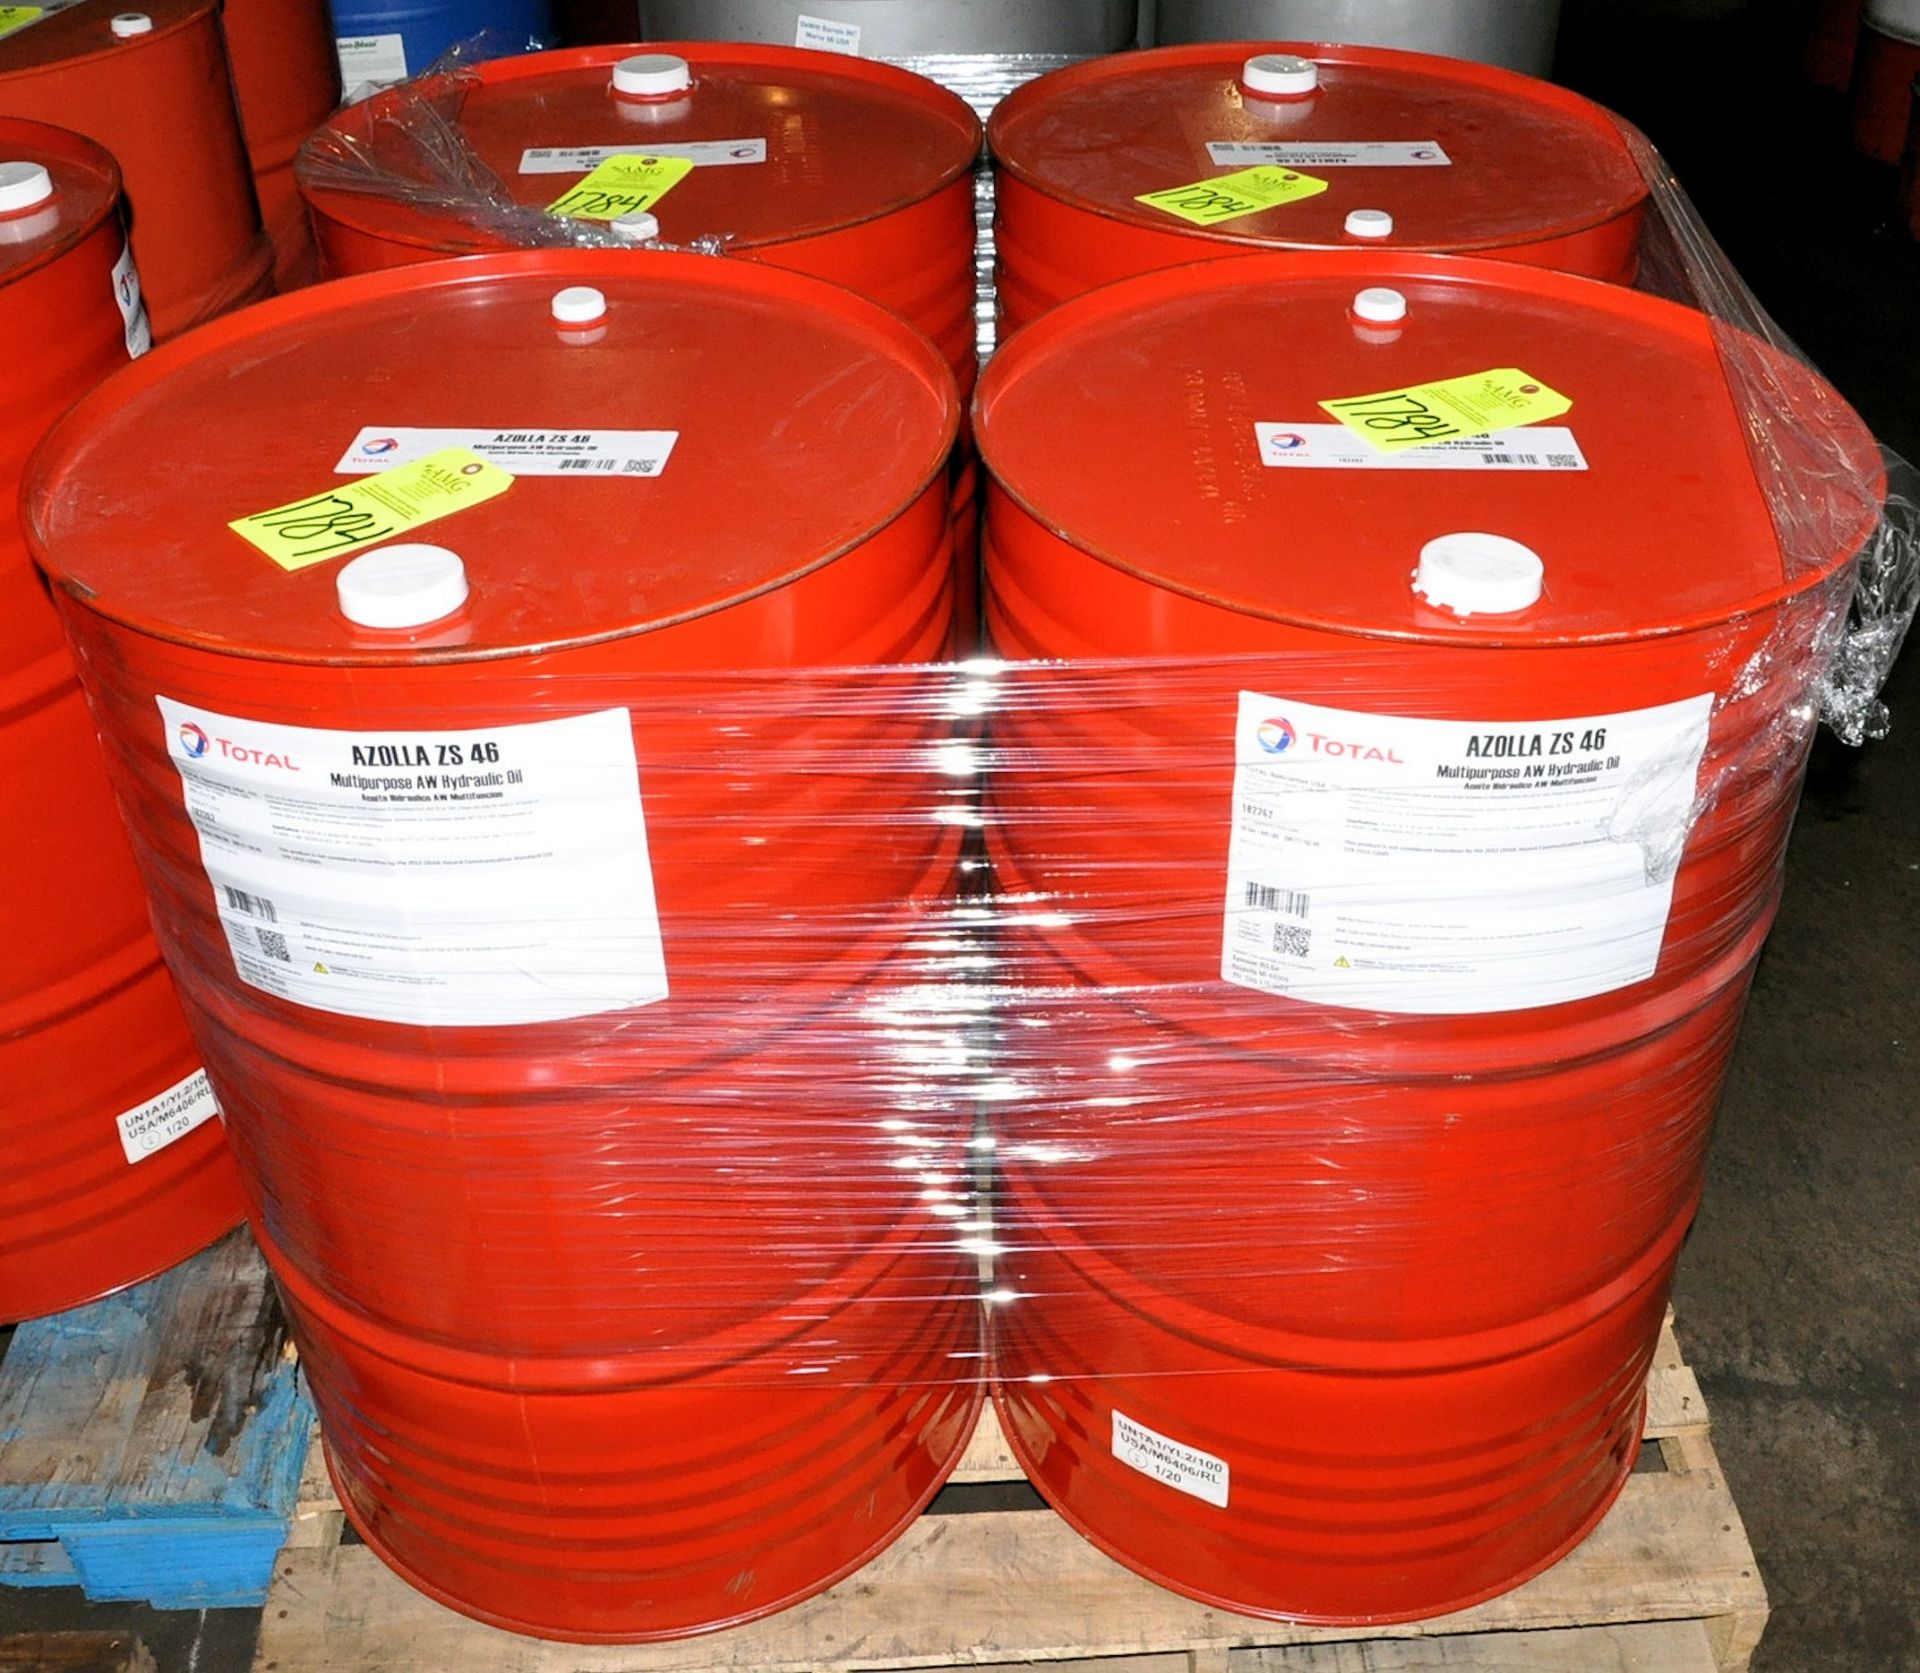 Lot-(4) 55-Gallon Drums of Total Azolla ZS 46 Multipurpose AW Hydraulic Oil on (1) Pallet, (Oils